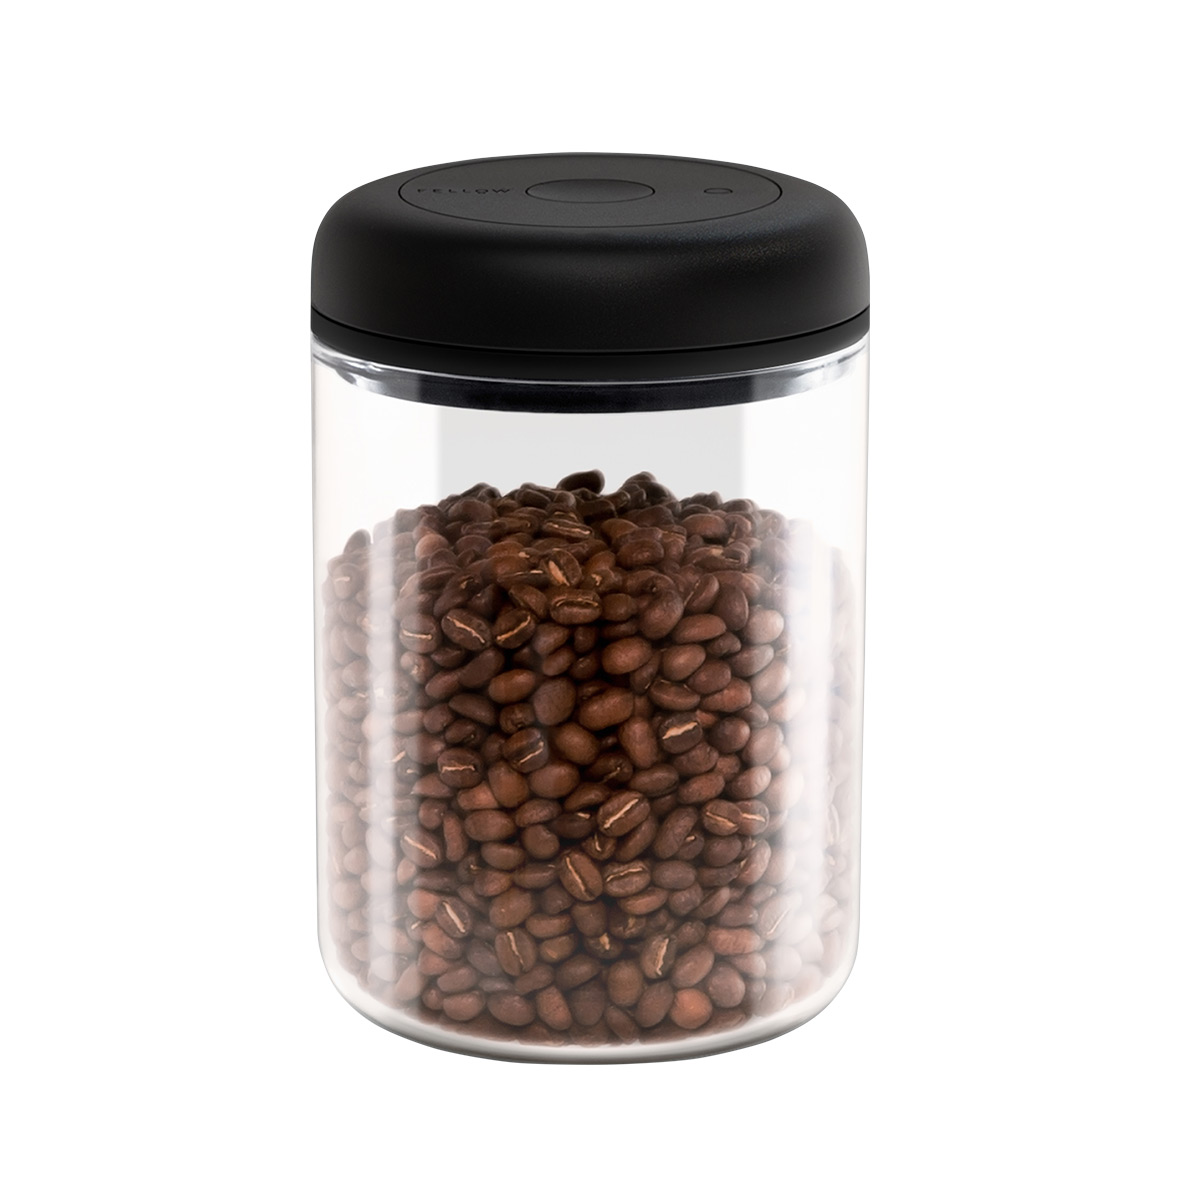 https://www.containerstore.com/catalogimages/490364/10094671-Atmos_CG_1.2L-ven.jpg